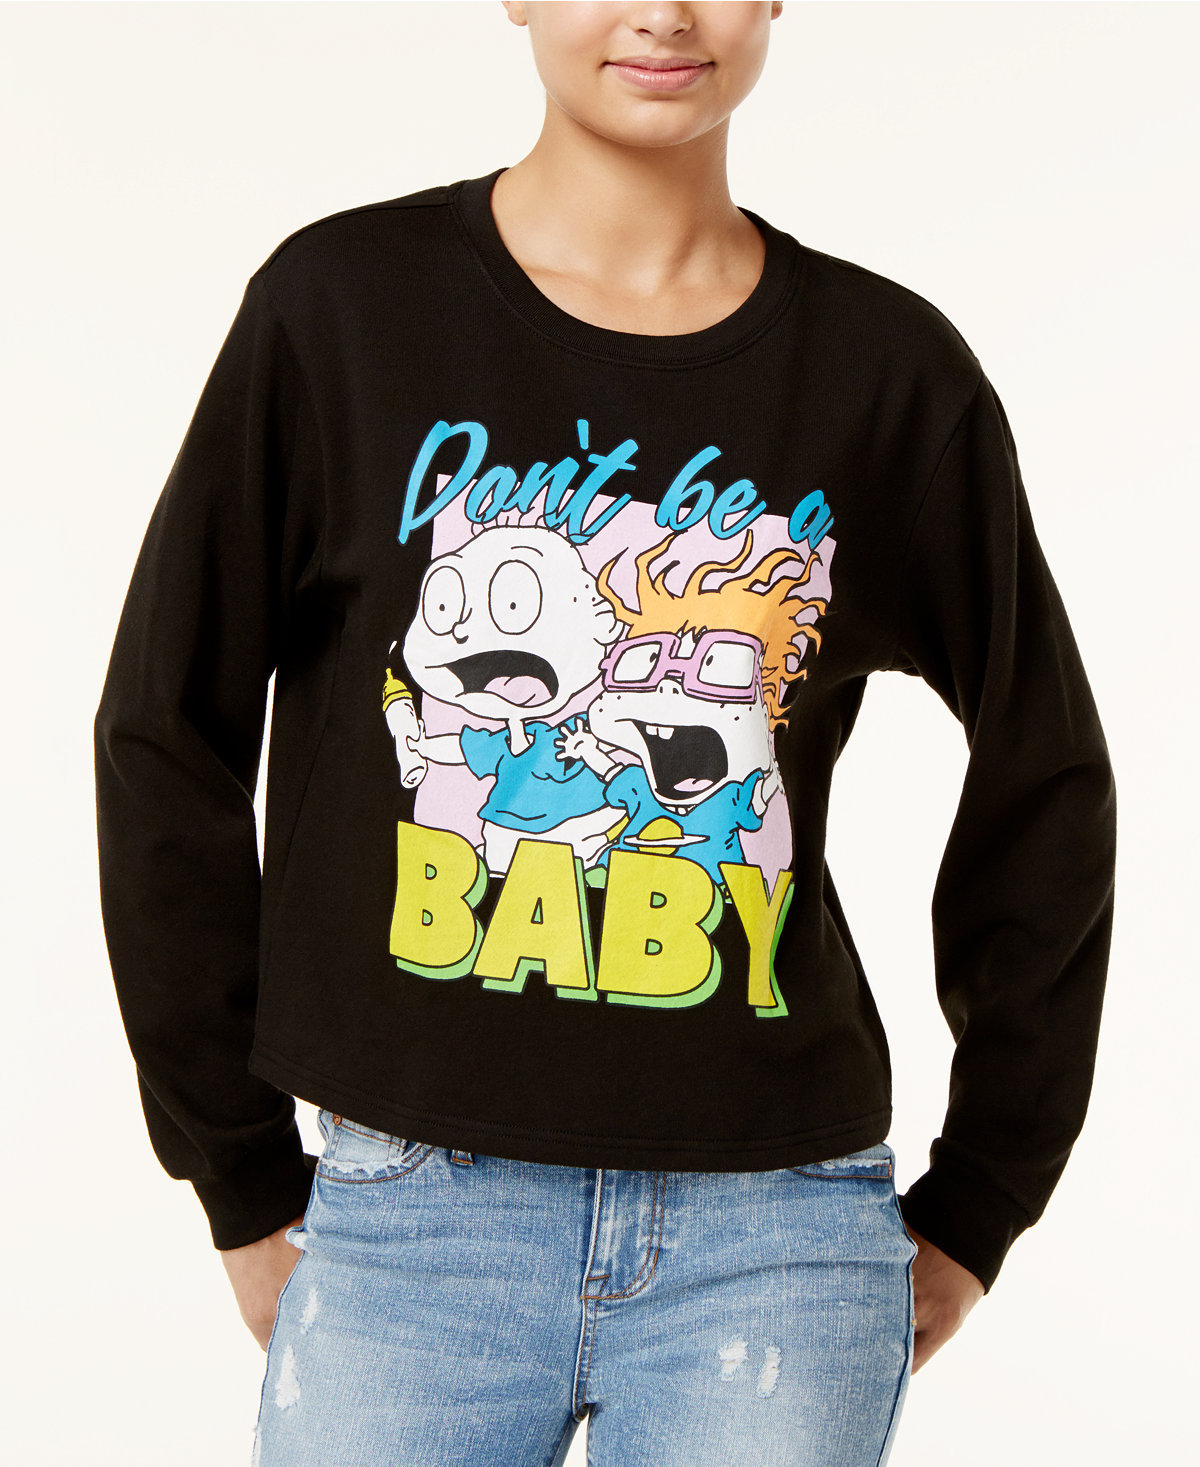 Represent Your Favorite 90s Show With This New Line Of Nickelodeon Inspired Clothes